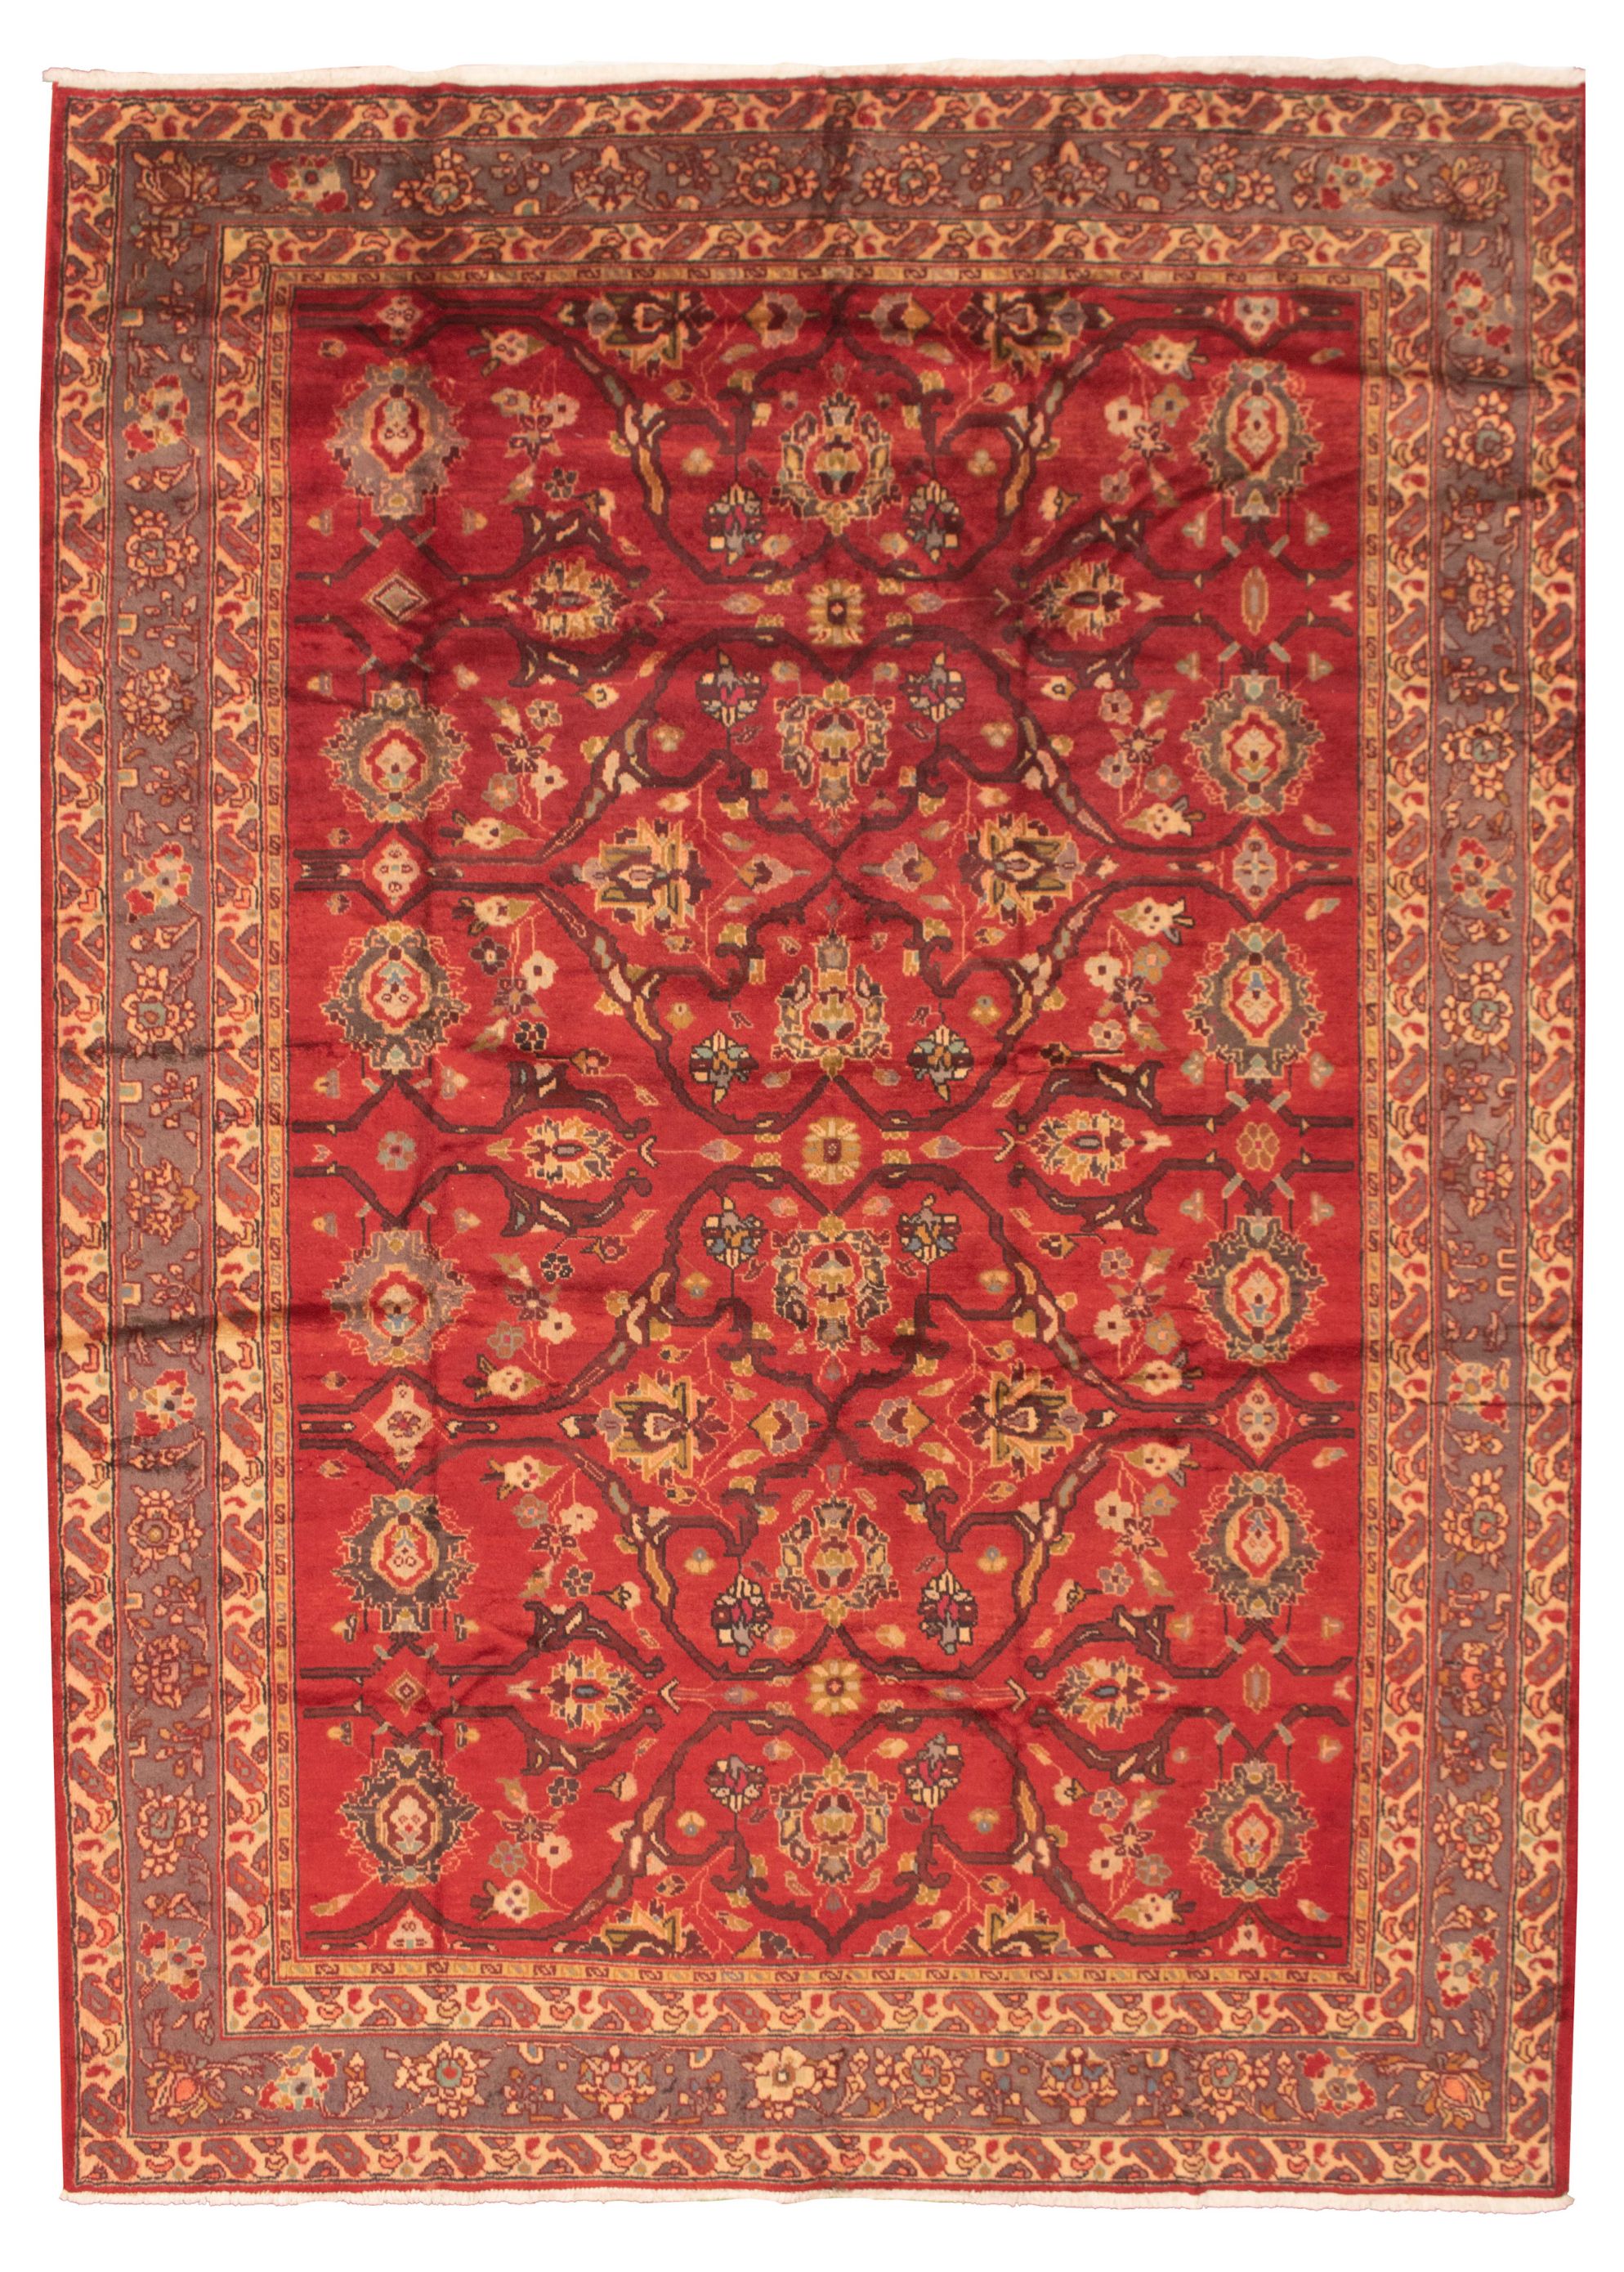 Hand-knotted Authentic Turkish Red Wool Rug 8'2" x 11'6" Size: 8'2" x 11'6"  